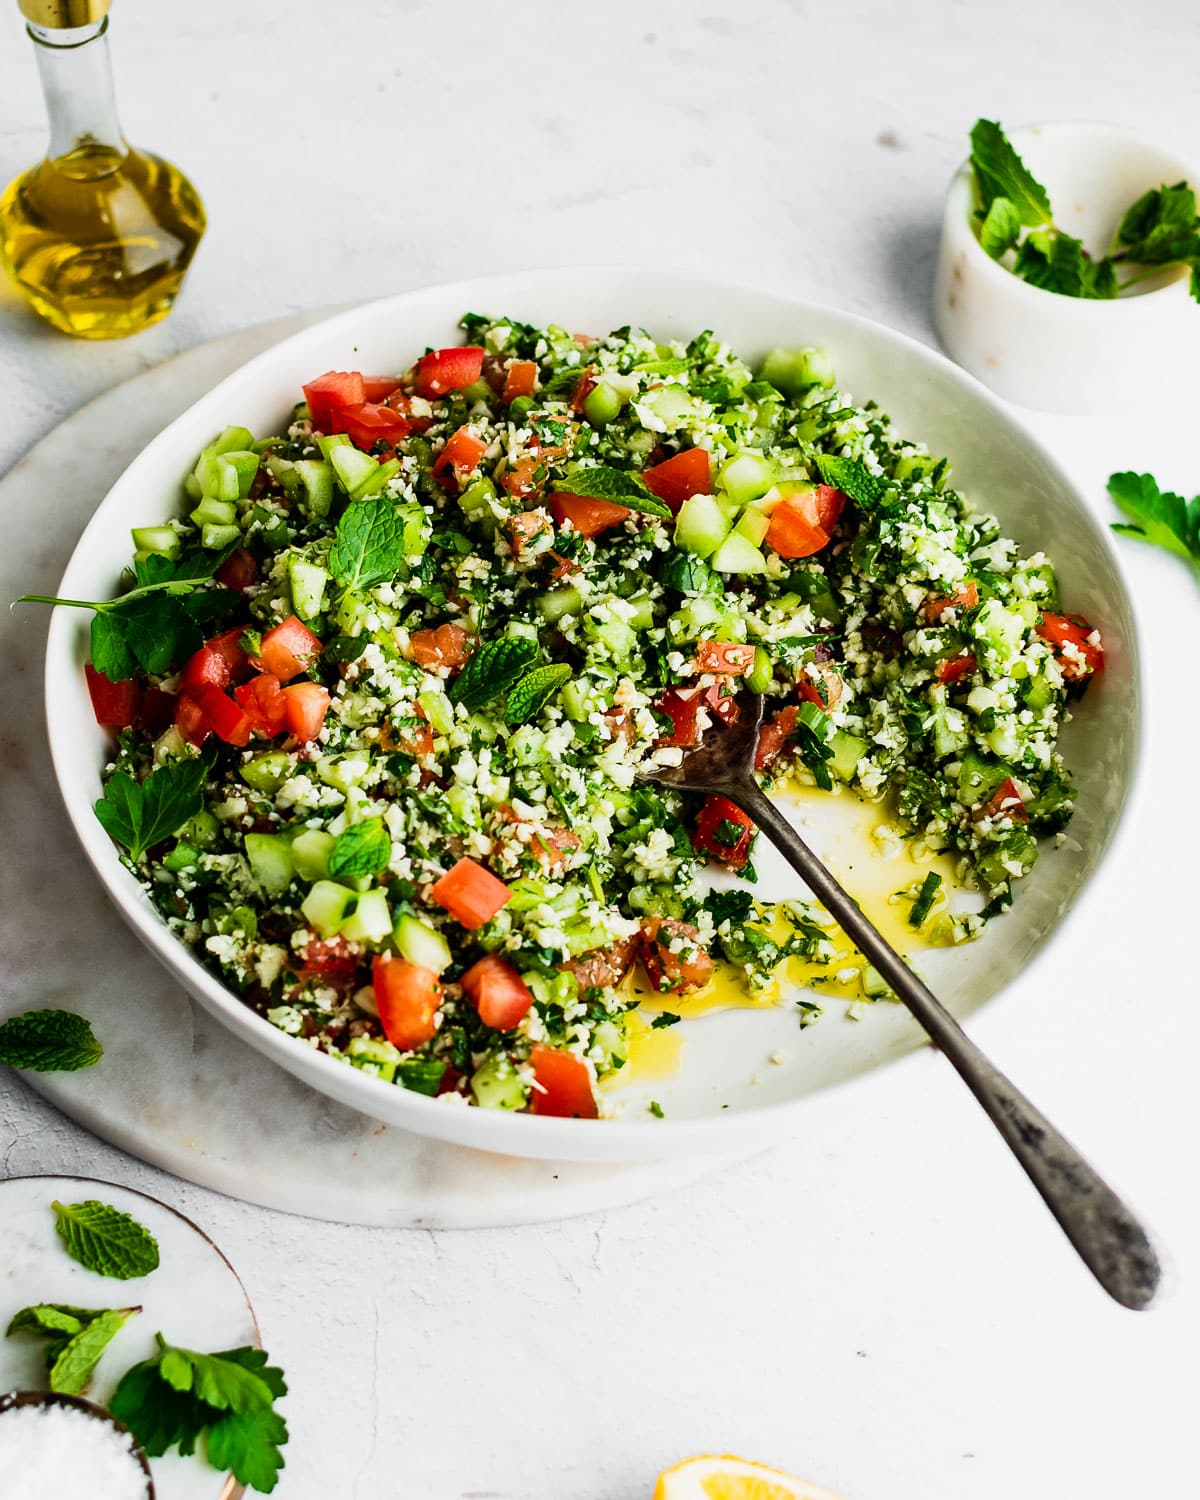 Cauliflower tabbouleh in a white bowl, garnished with mint, lemon and parsley